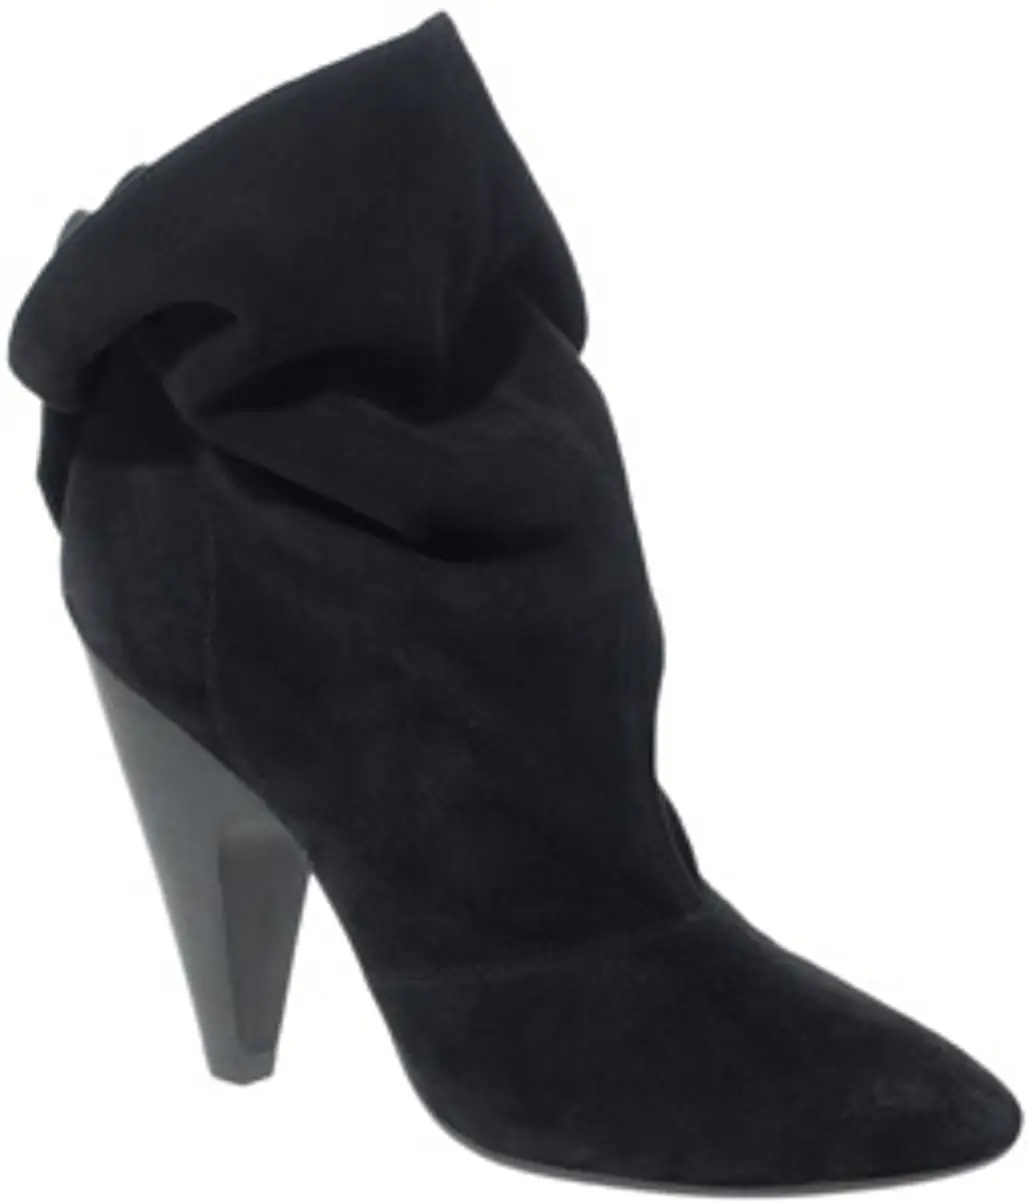 Ash Illusion Heeled Slouchy Boots